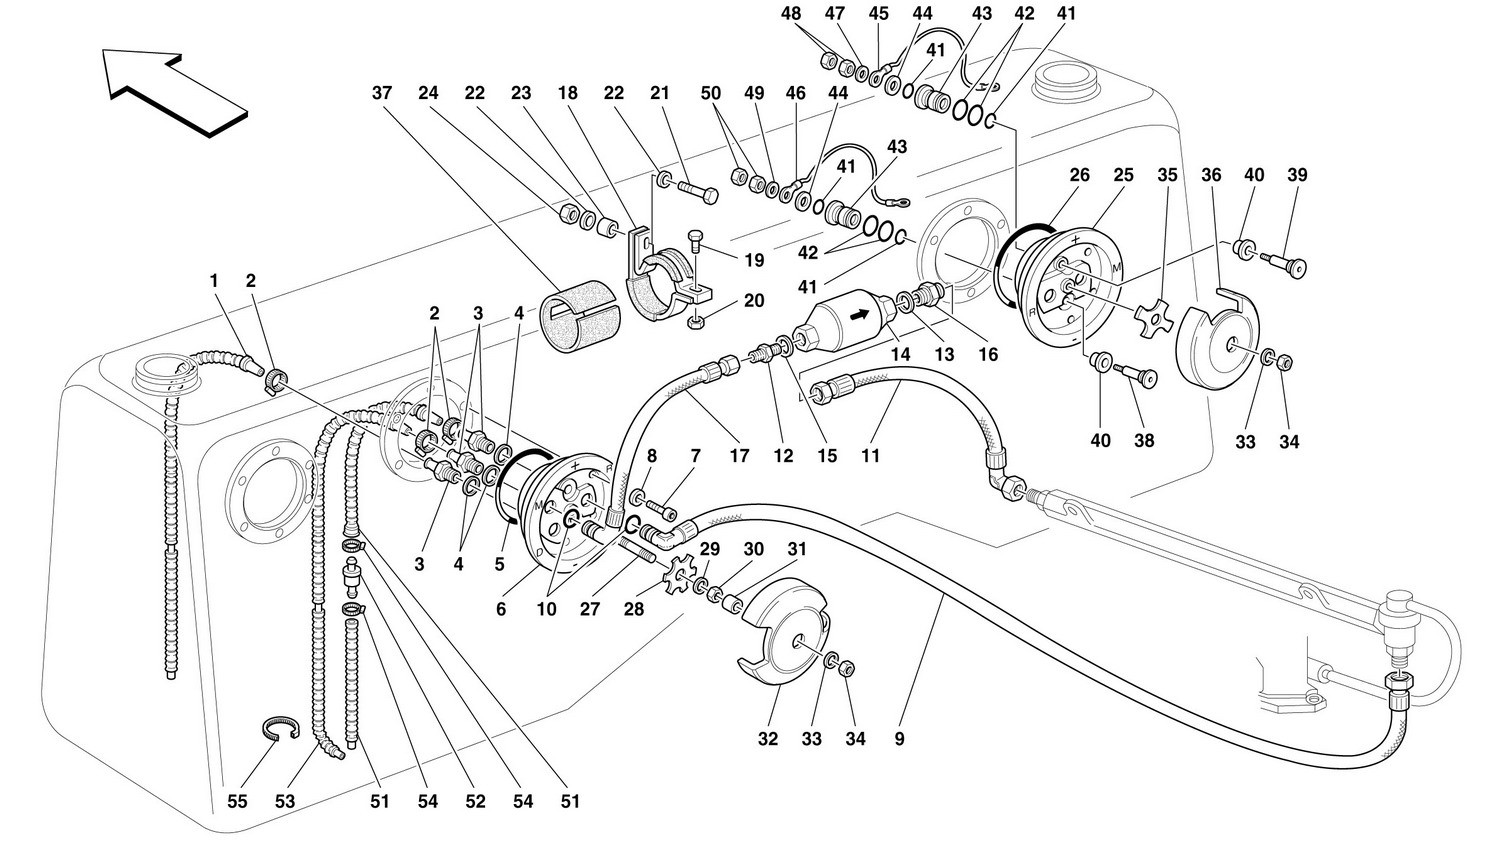 FUEL INJECTION SYSTEM